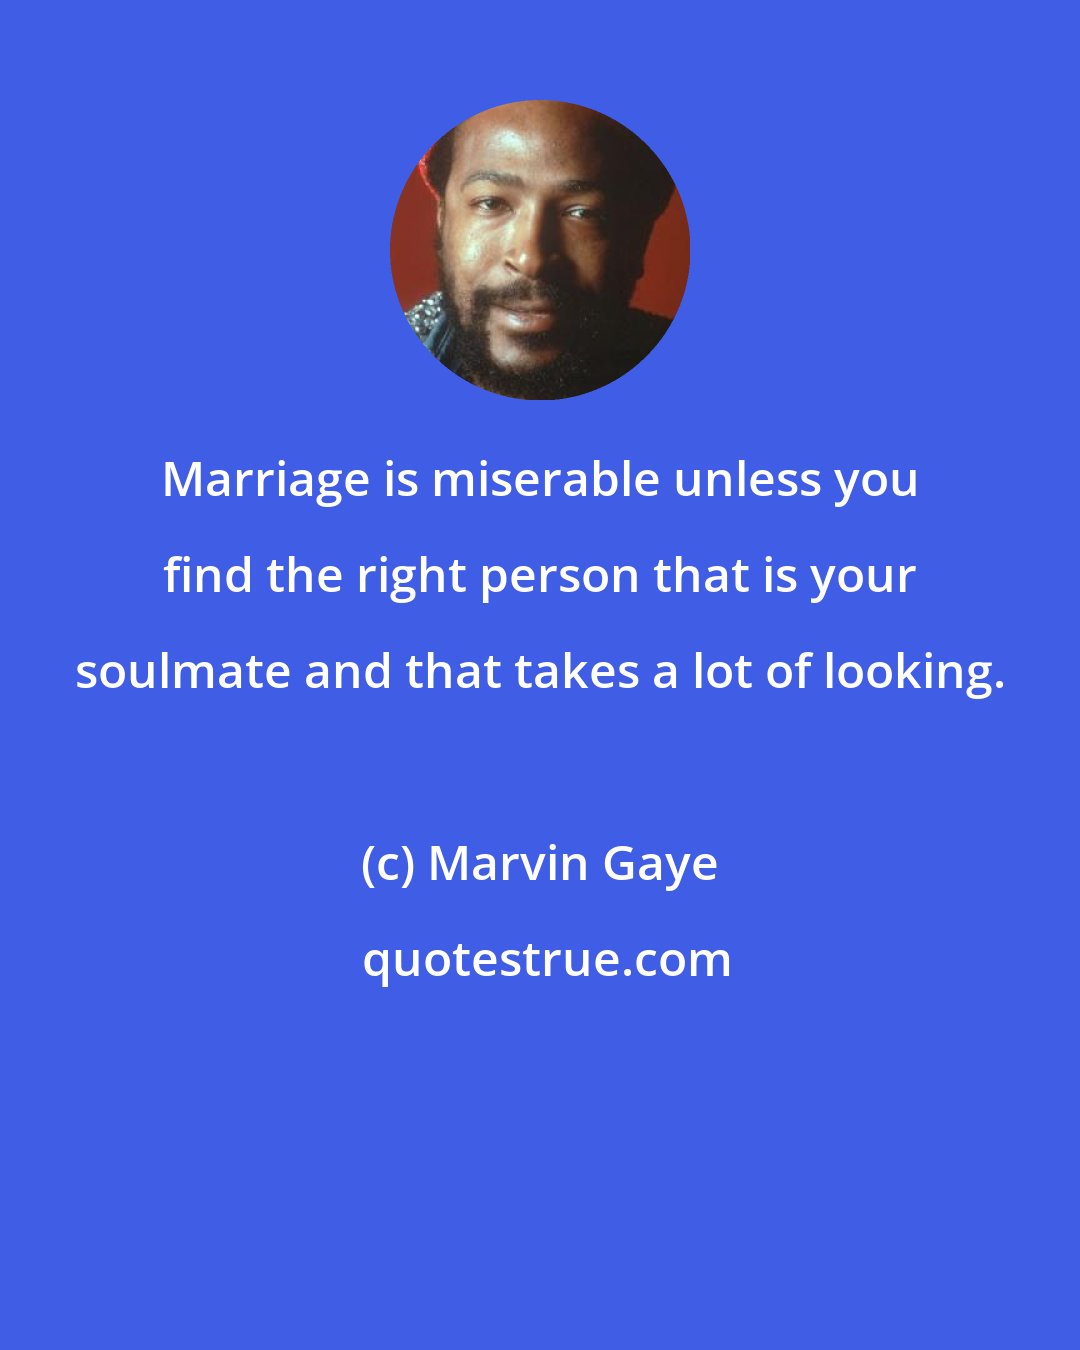 Marvin Gaye: Marriage is miserable unless you find the right person that is your soulmate and that takes a lot of looking.